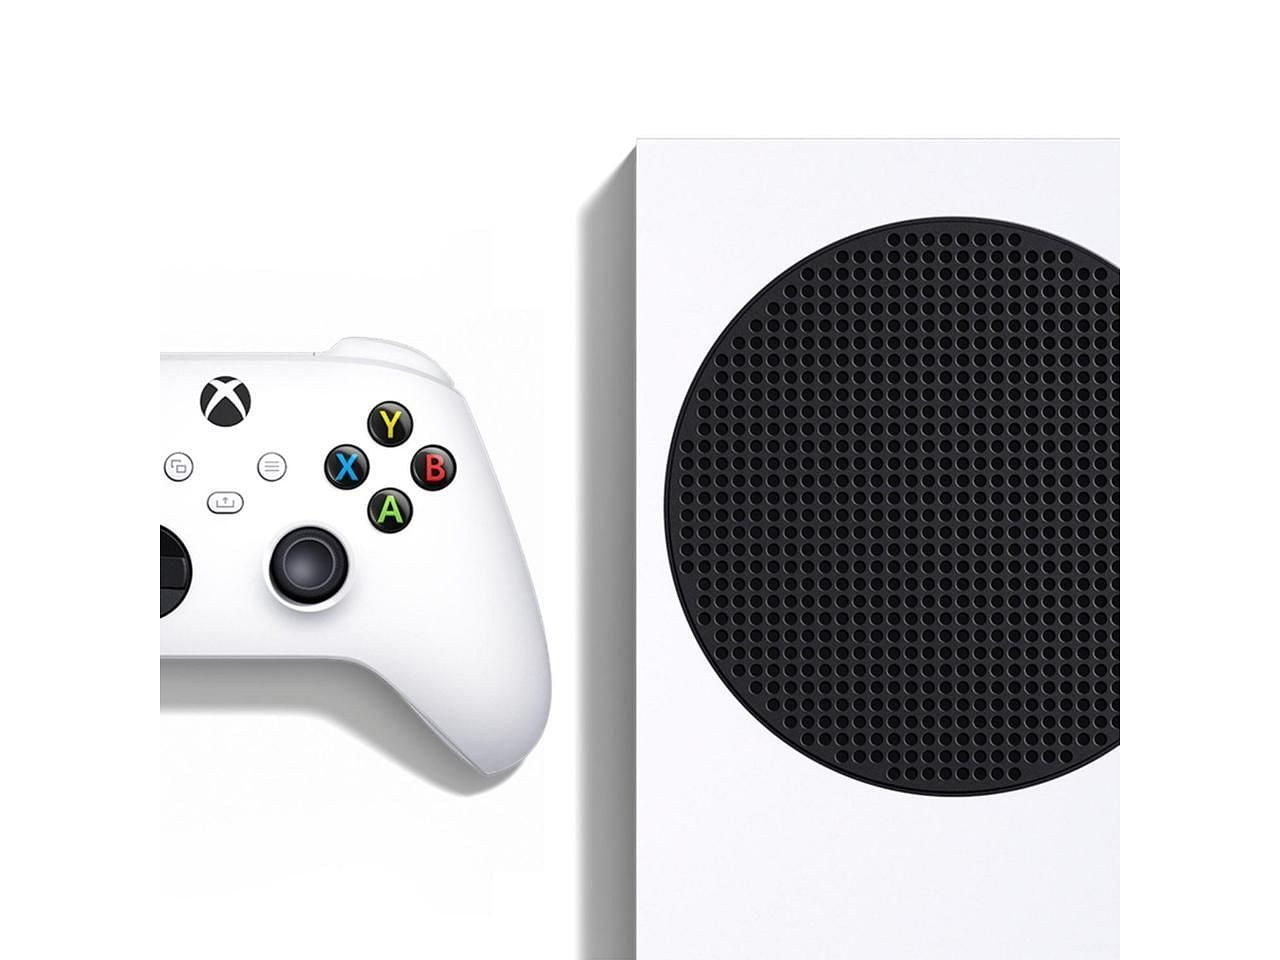 The Xbox Series S gaming console with an Xbox Wireless Robot White controller (Image via Newegg)